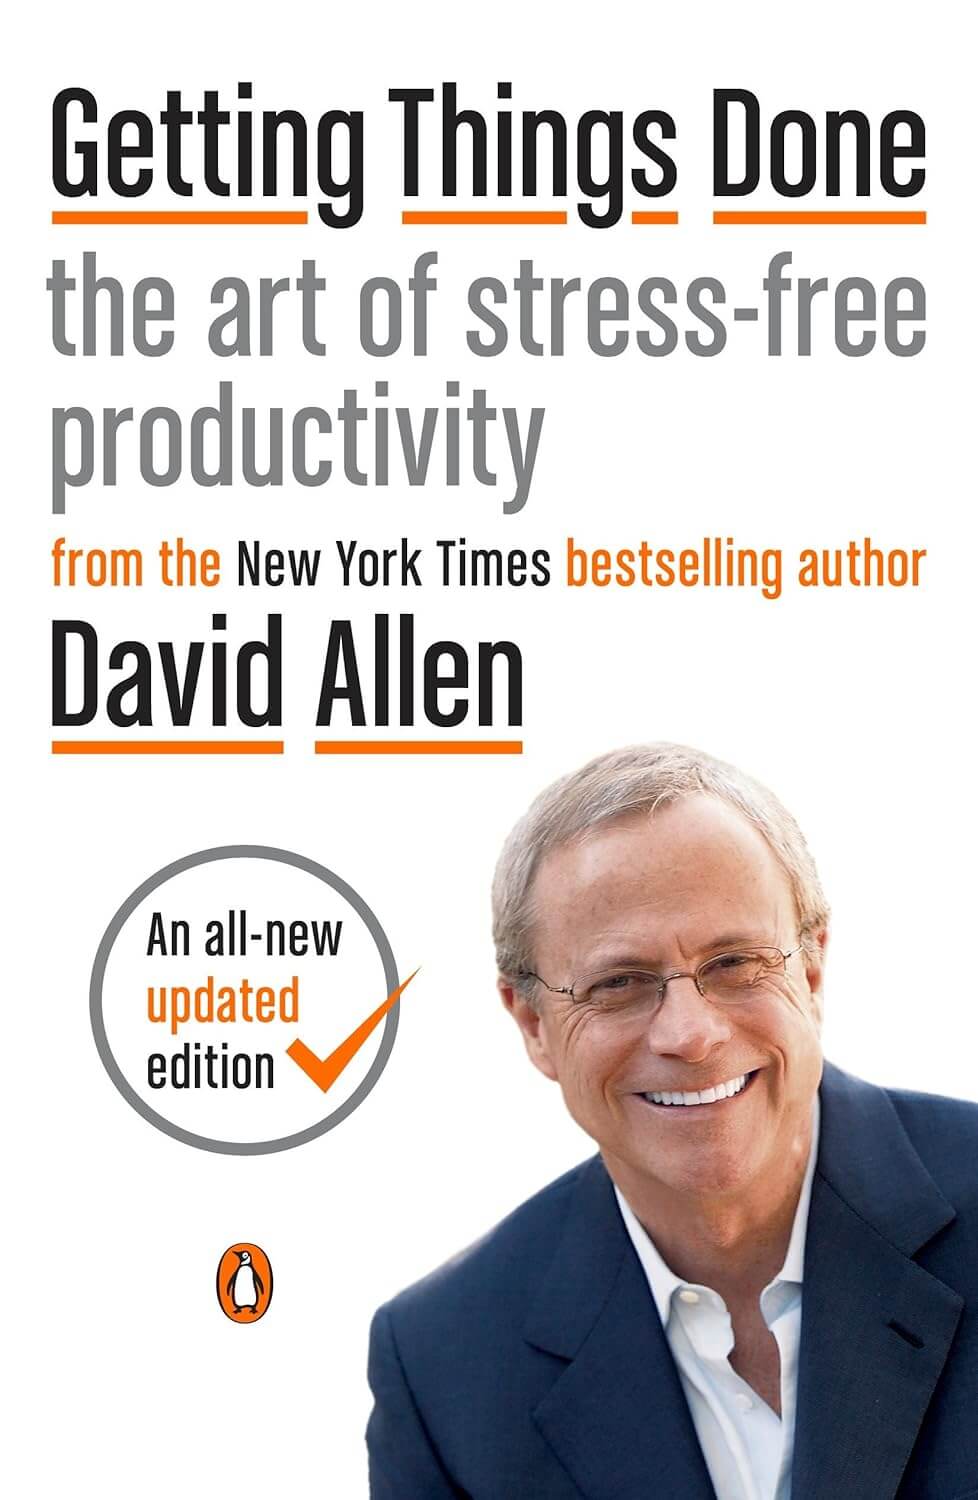 Book cover "Getting Things Done" by David Allen